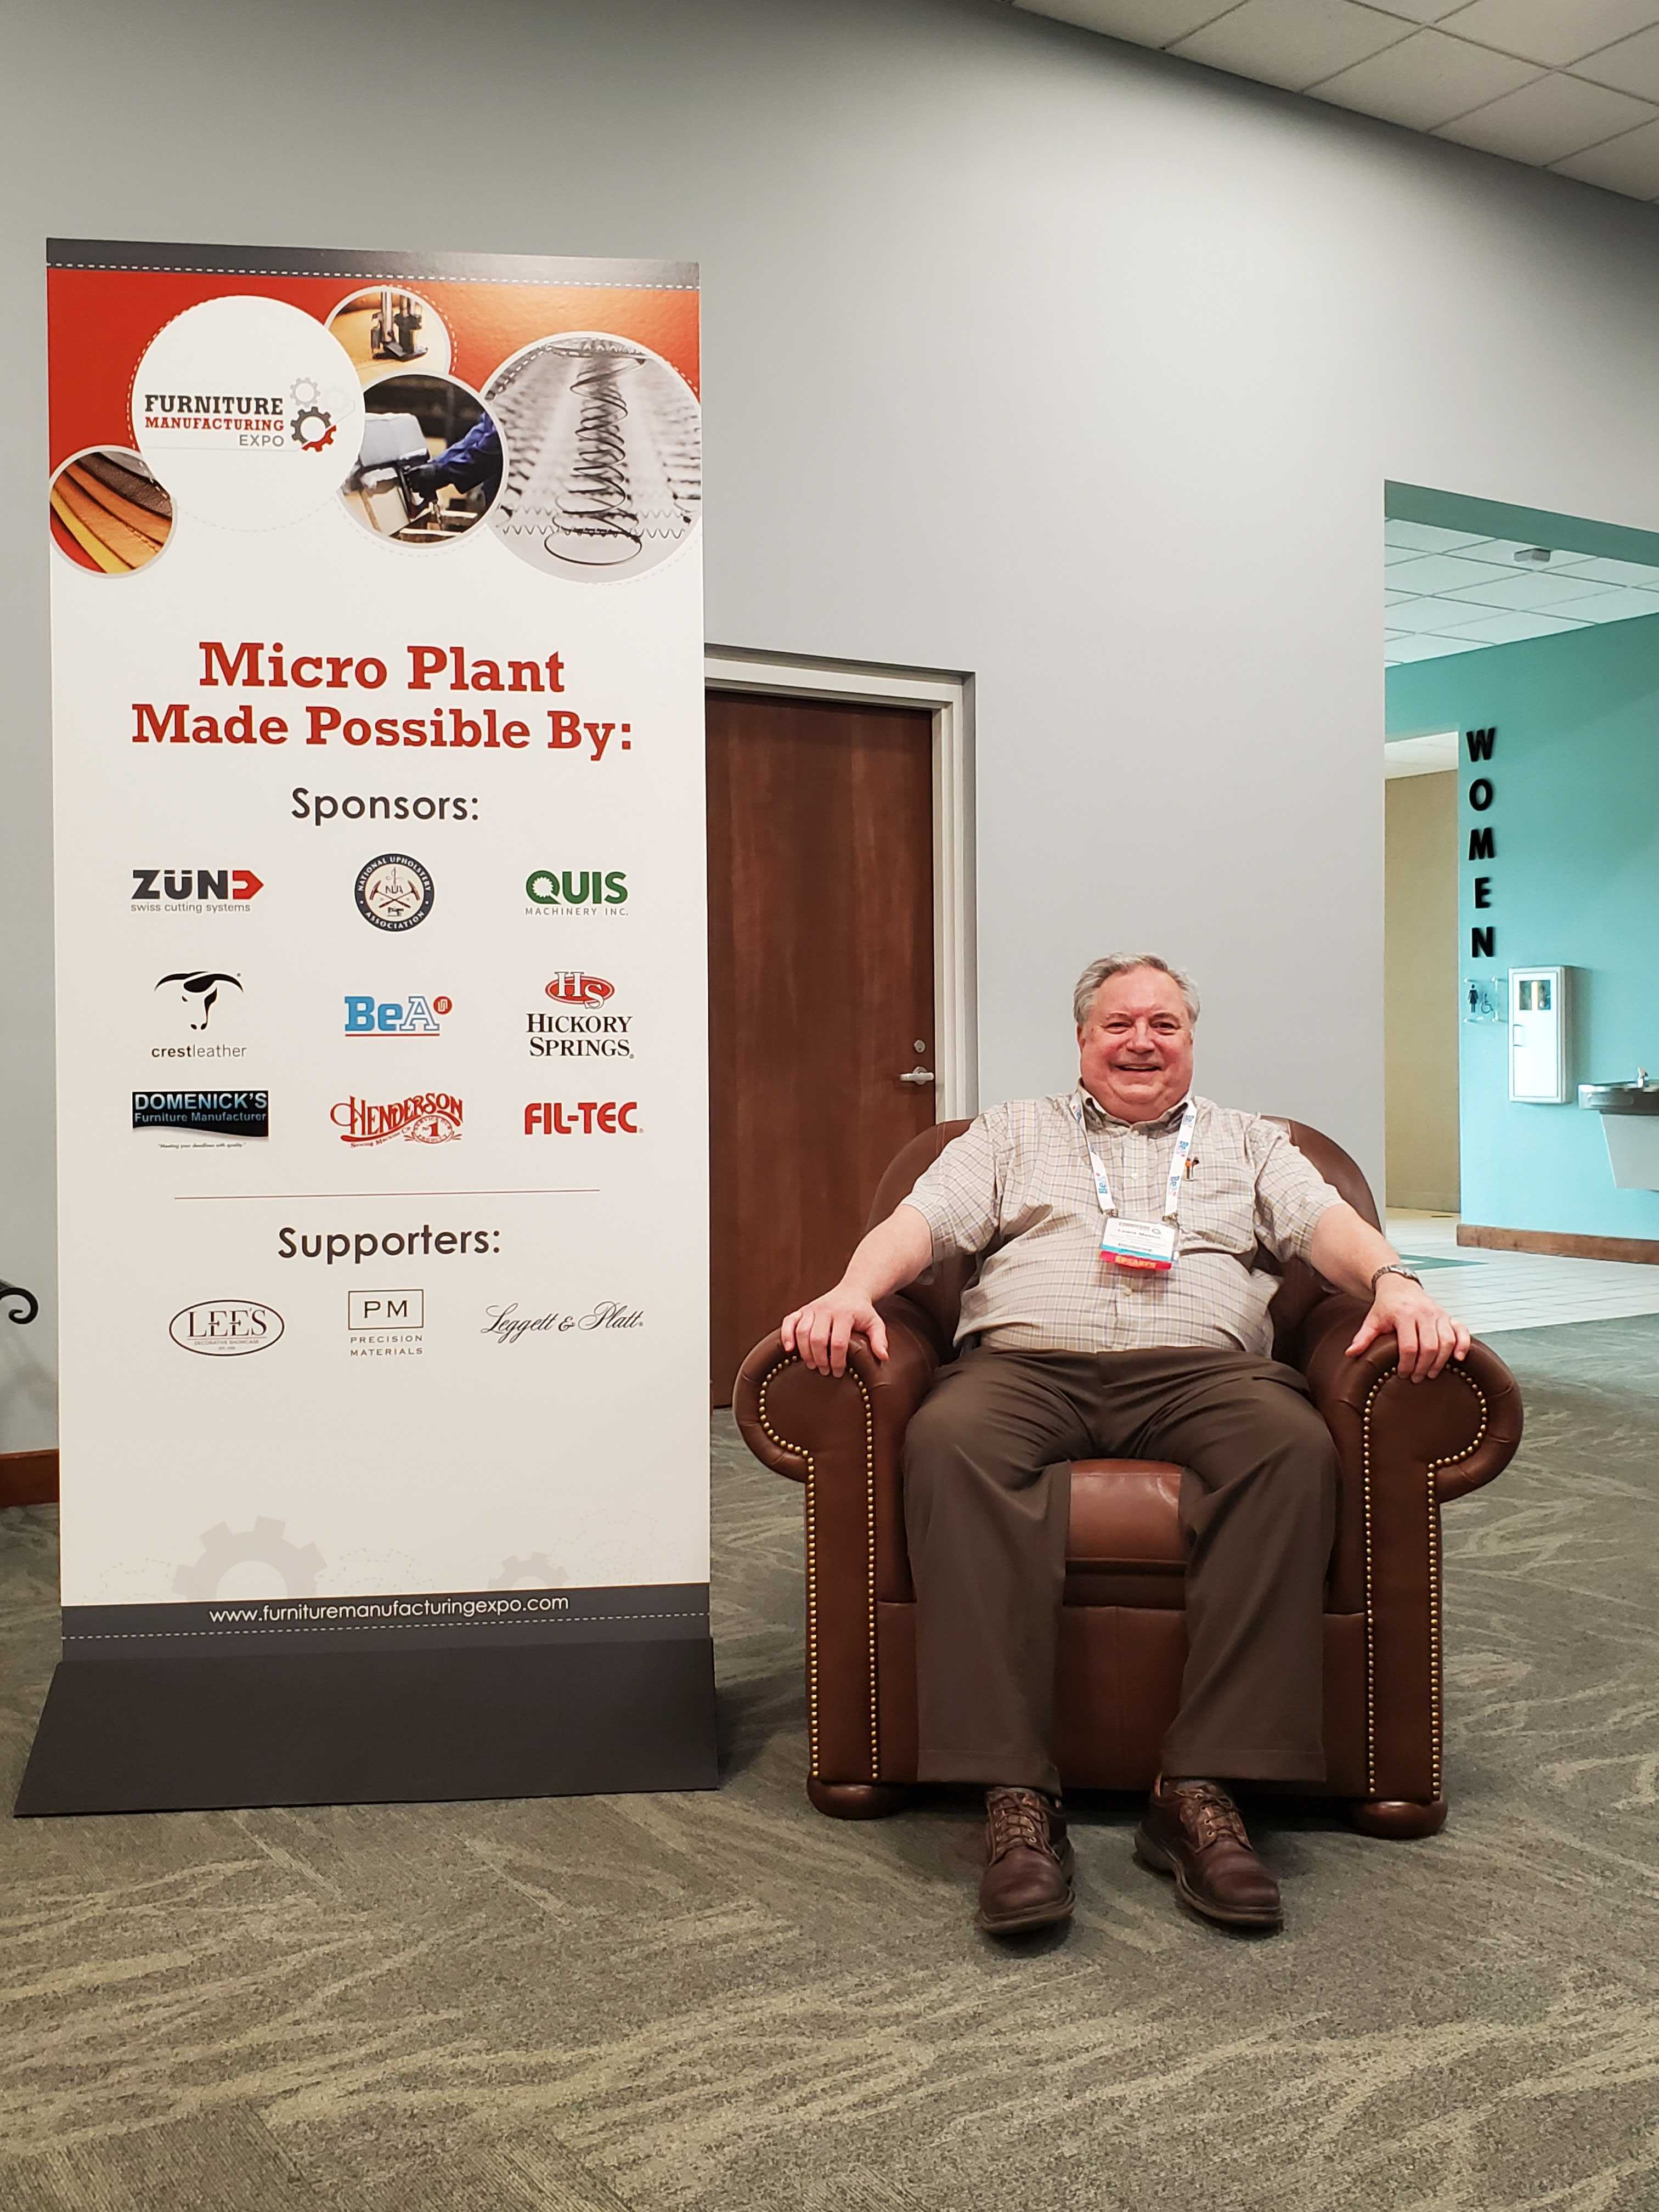 Lewis Mabon rests on a chair manufactured during the Micro Plant event